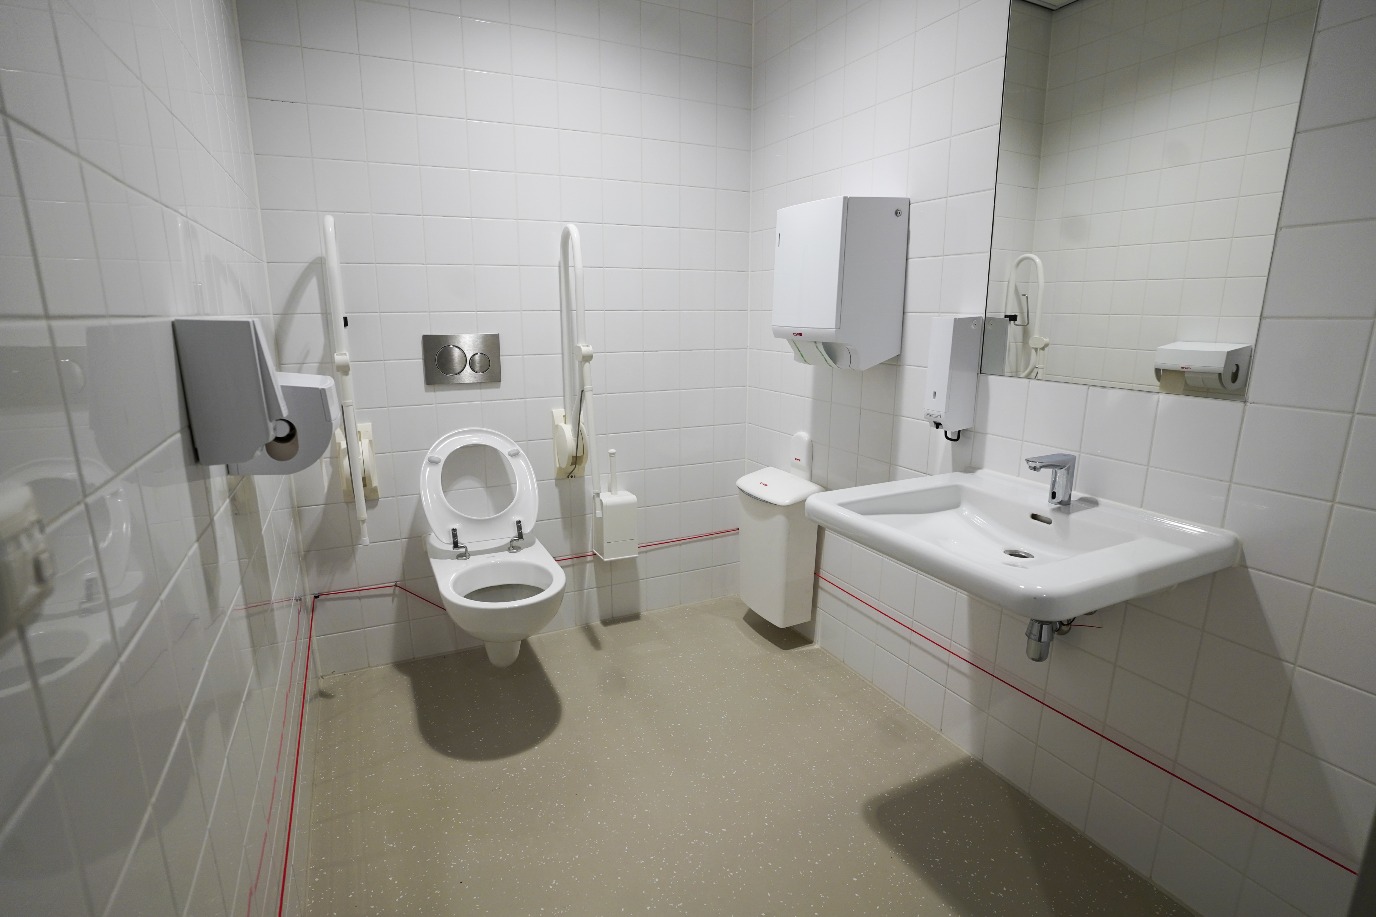 Wheelchair-friendly restroom on site in college part of building